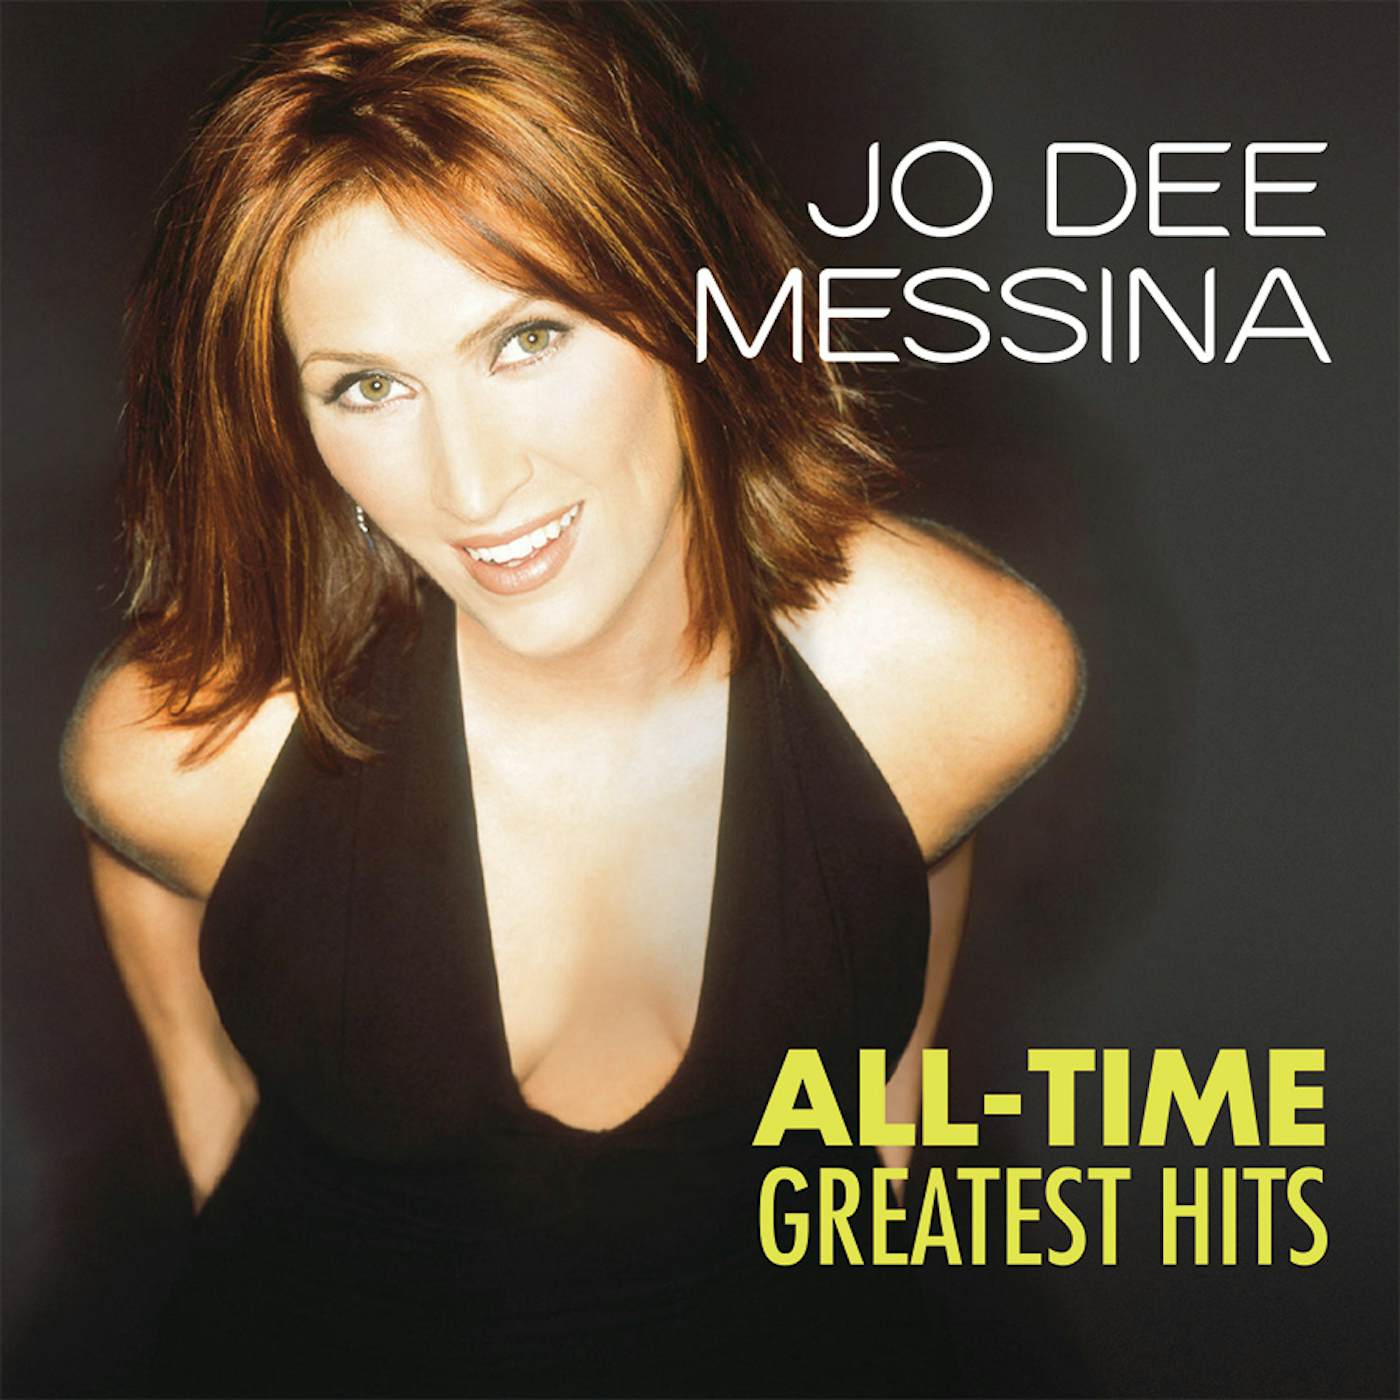 Jo Dee Messina ALL-TIME GREATEST HITS CD